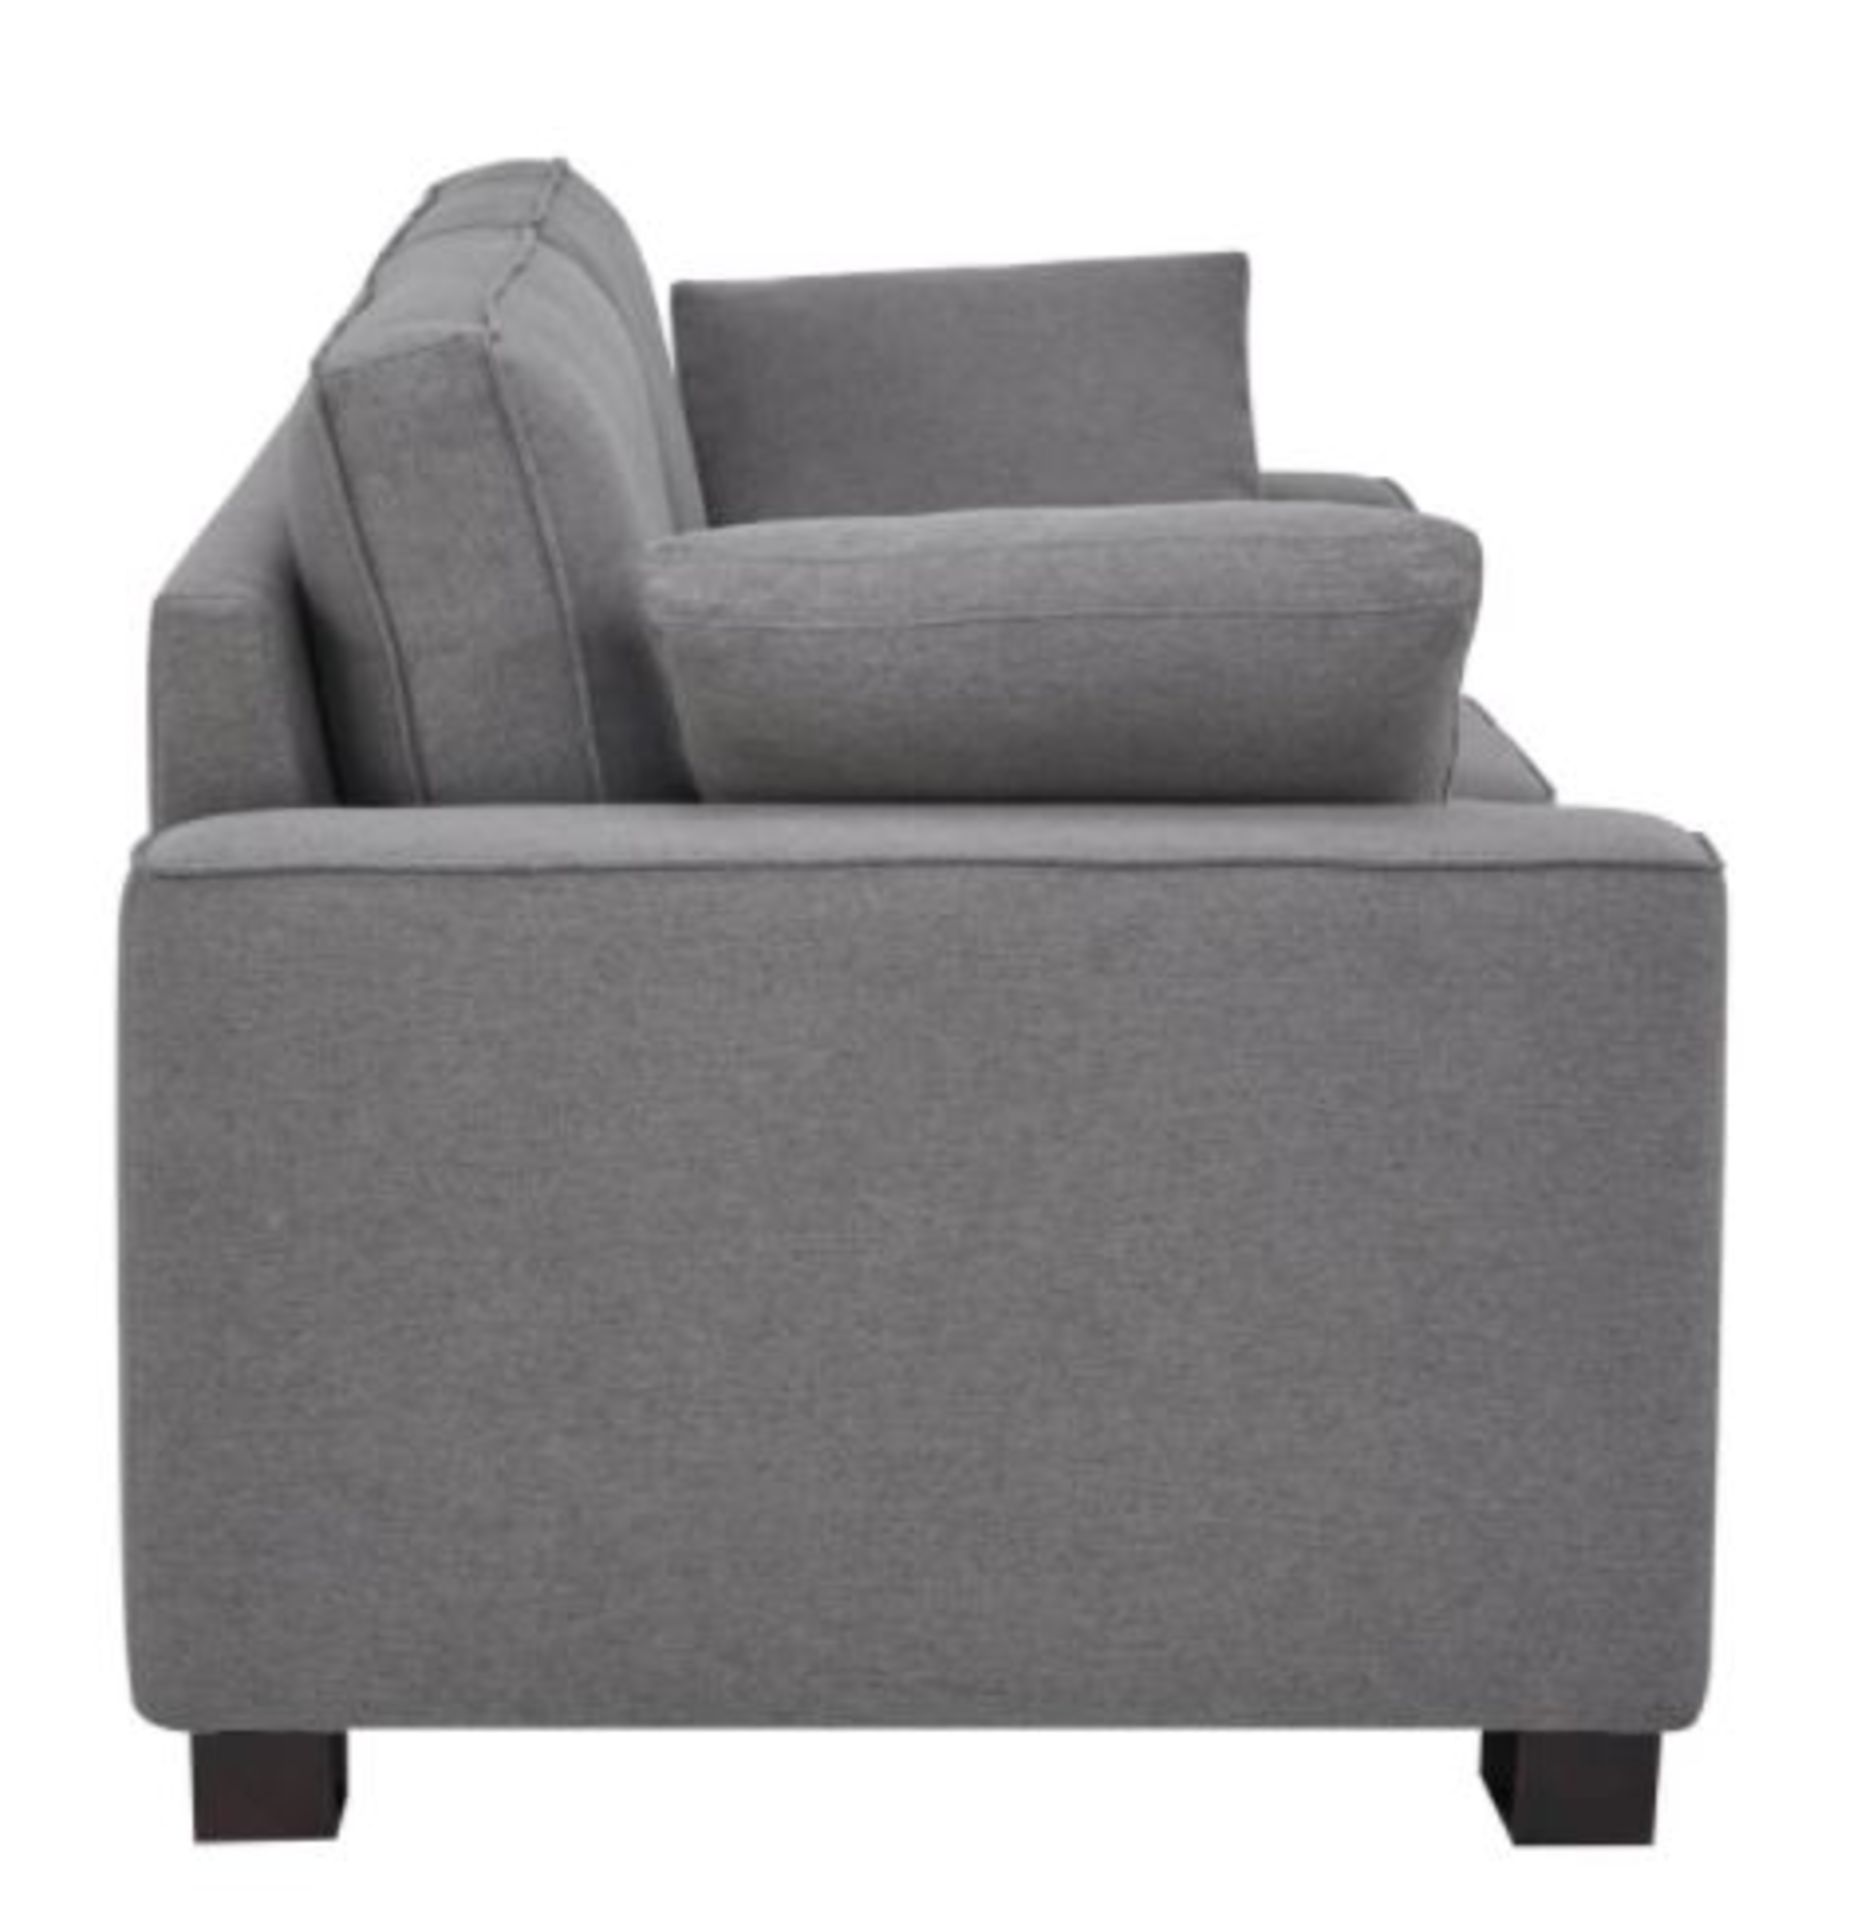 1 X Lola Sofa Charcoal. Wooden Frame With Solid Beechwood Legs. 100% Polyester Fabric Cover (H80xW2 - Image 4 of 6